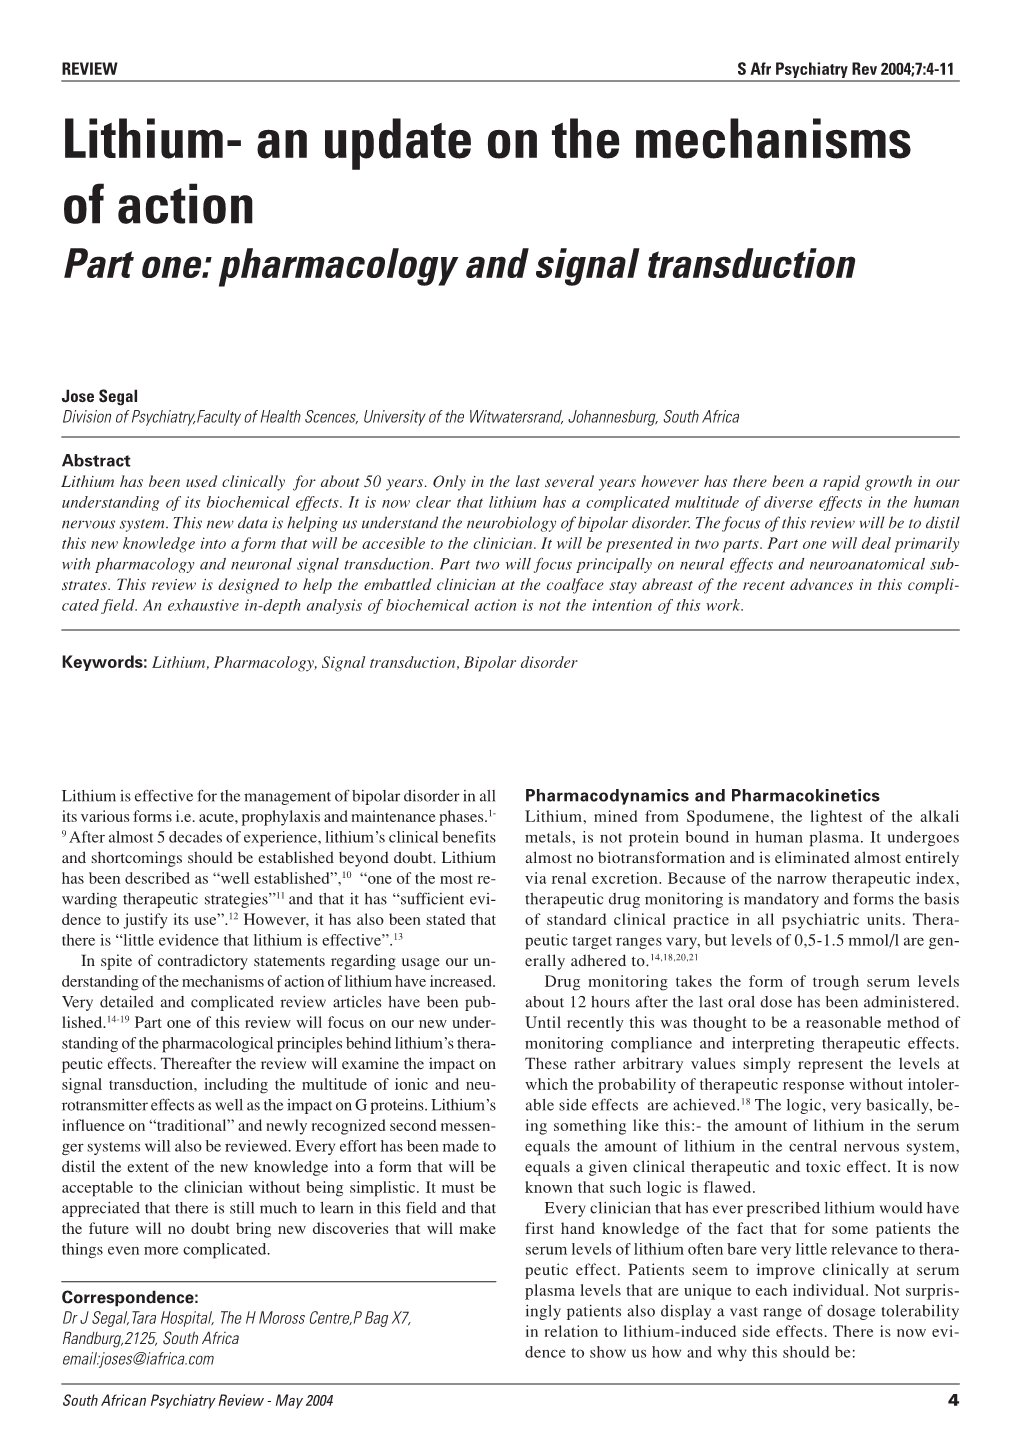 Lithium- an Update on the Mechanisms of Action Part One: Pharmacology and Signal Transduction